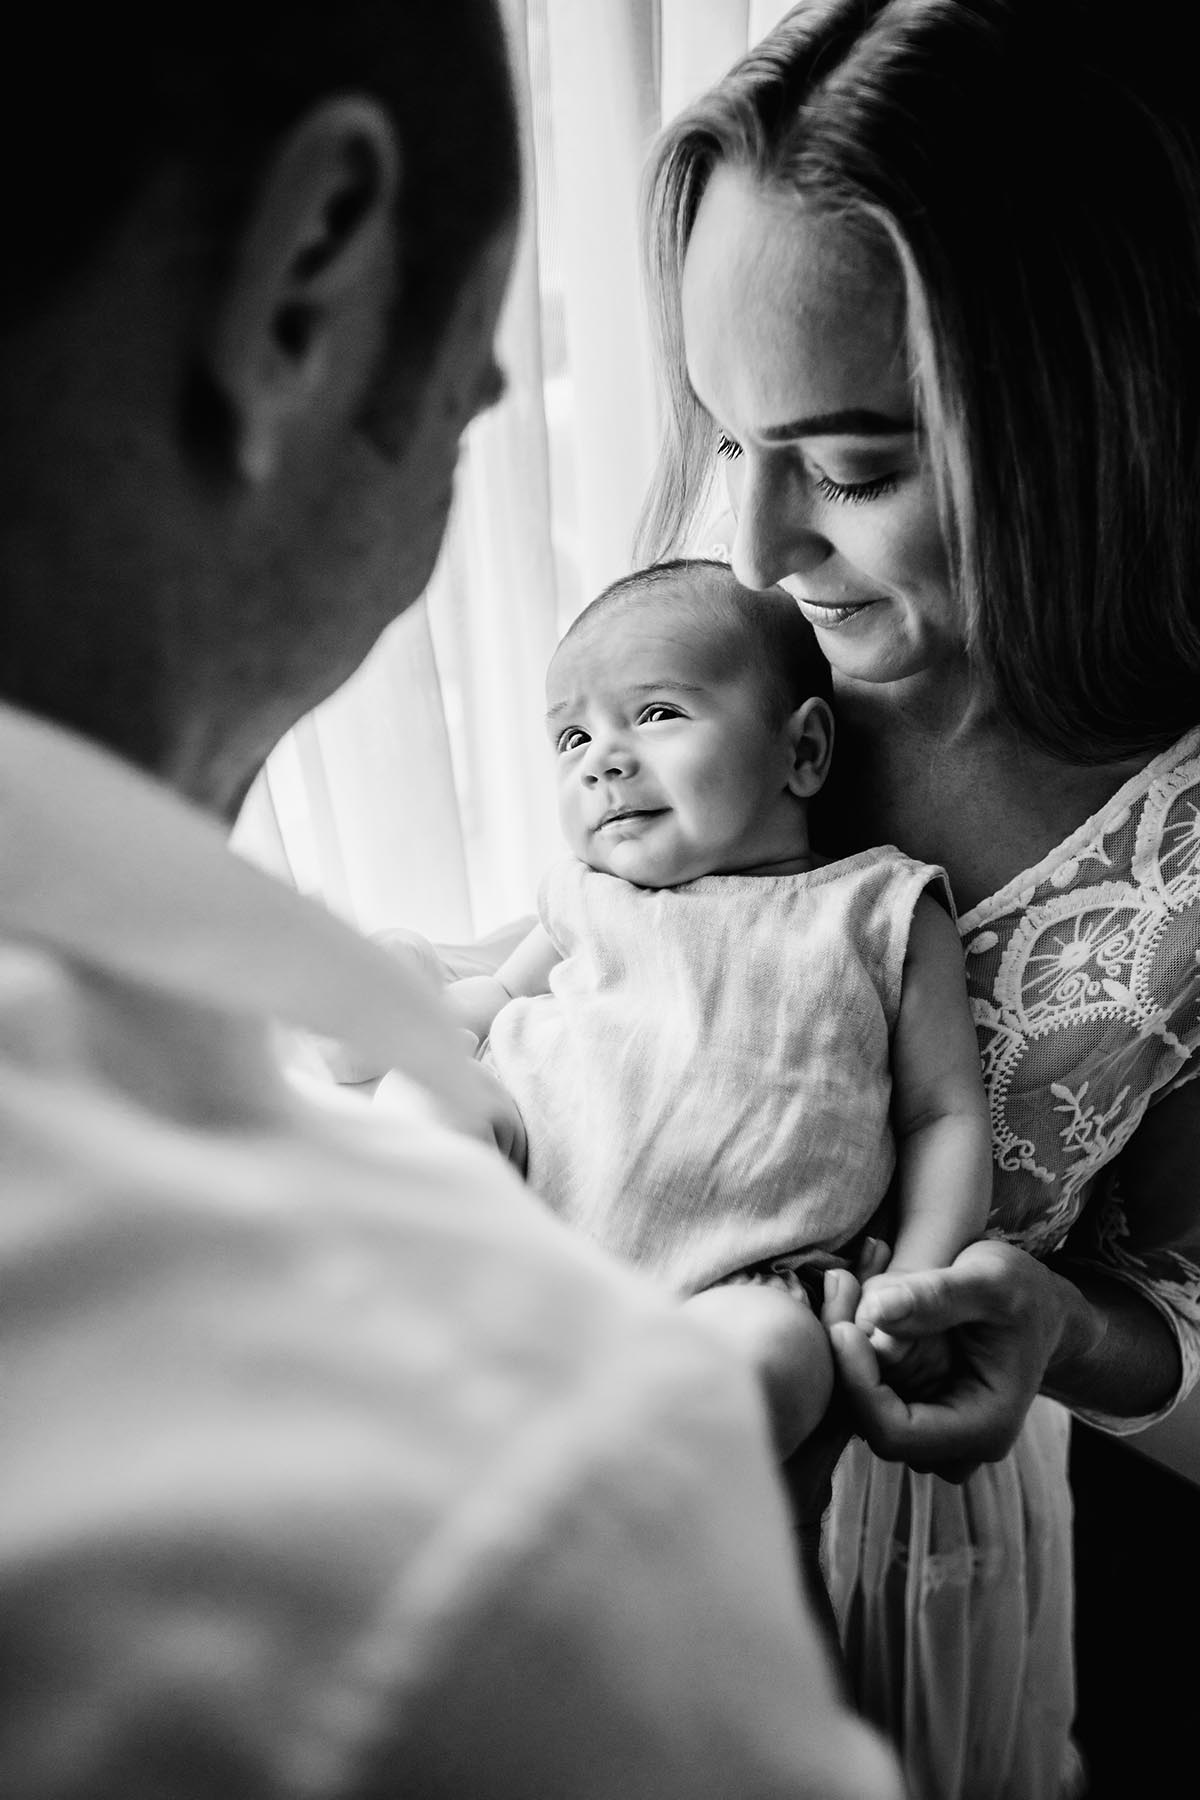 Parents stand together holding their newborn between them, in front of window light